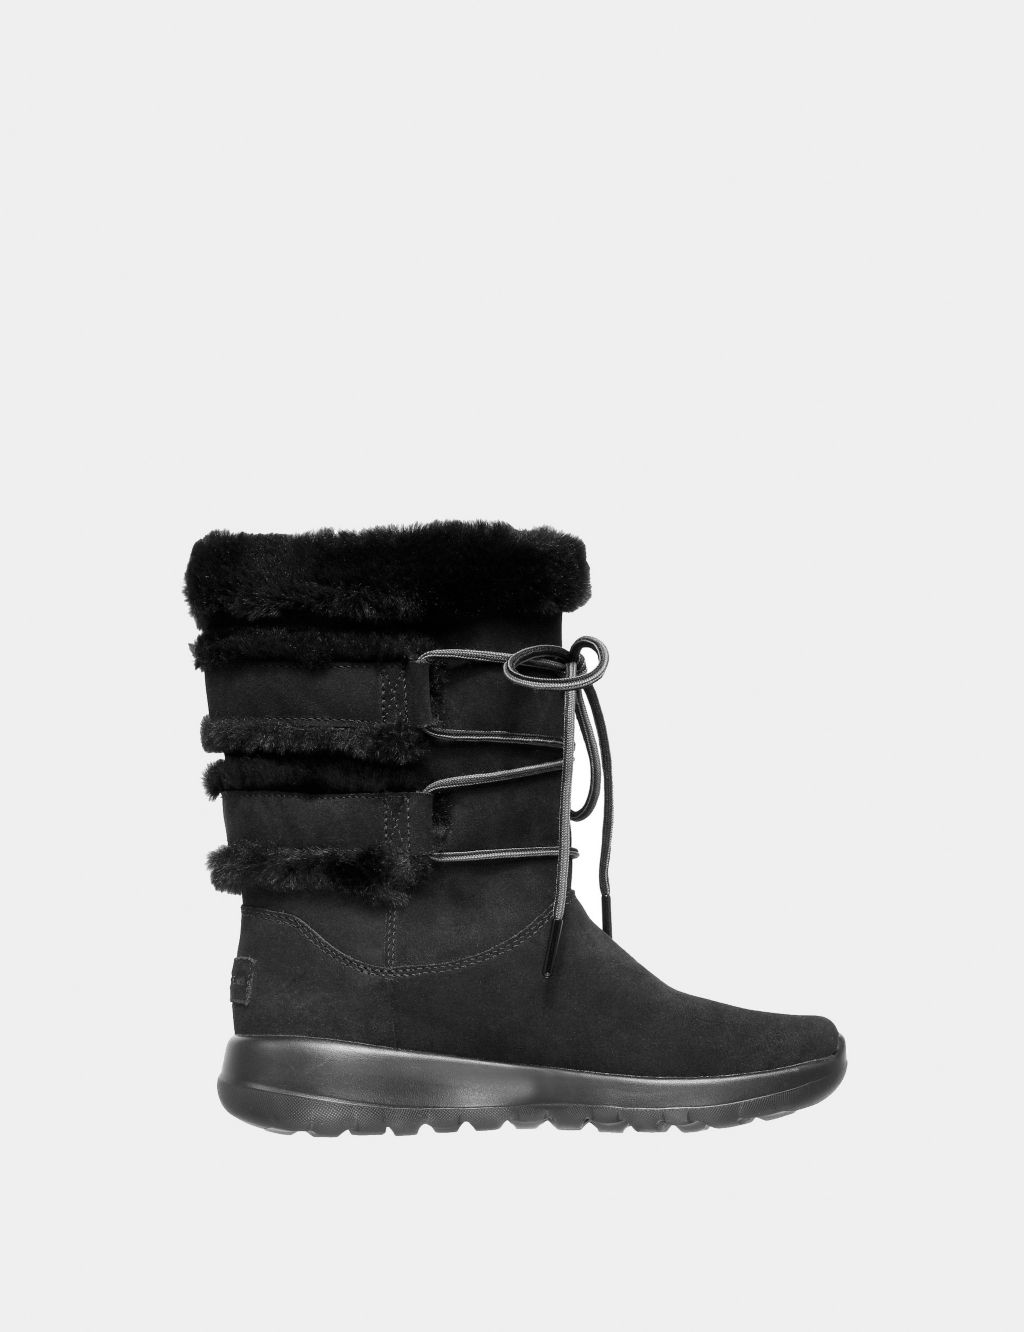 On-The-Go Joy Cyclone Leather Winter Boots image 1